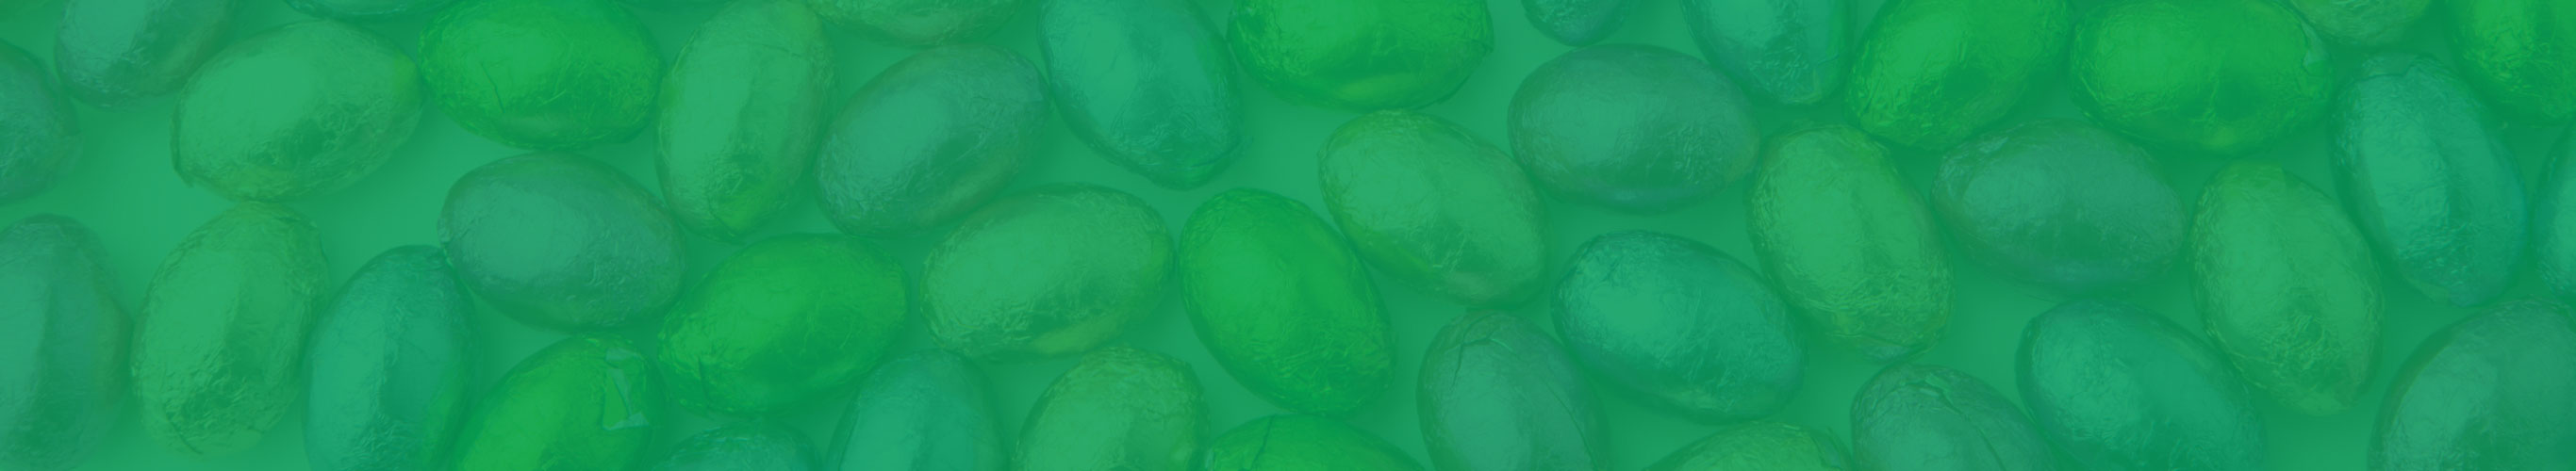 background image of mini chocolate eggs with green overlay